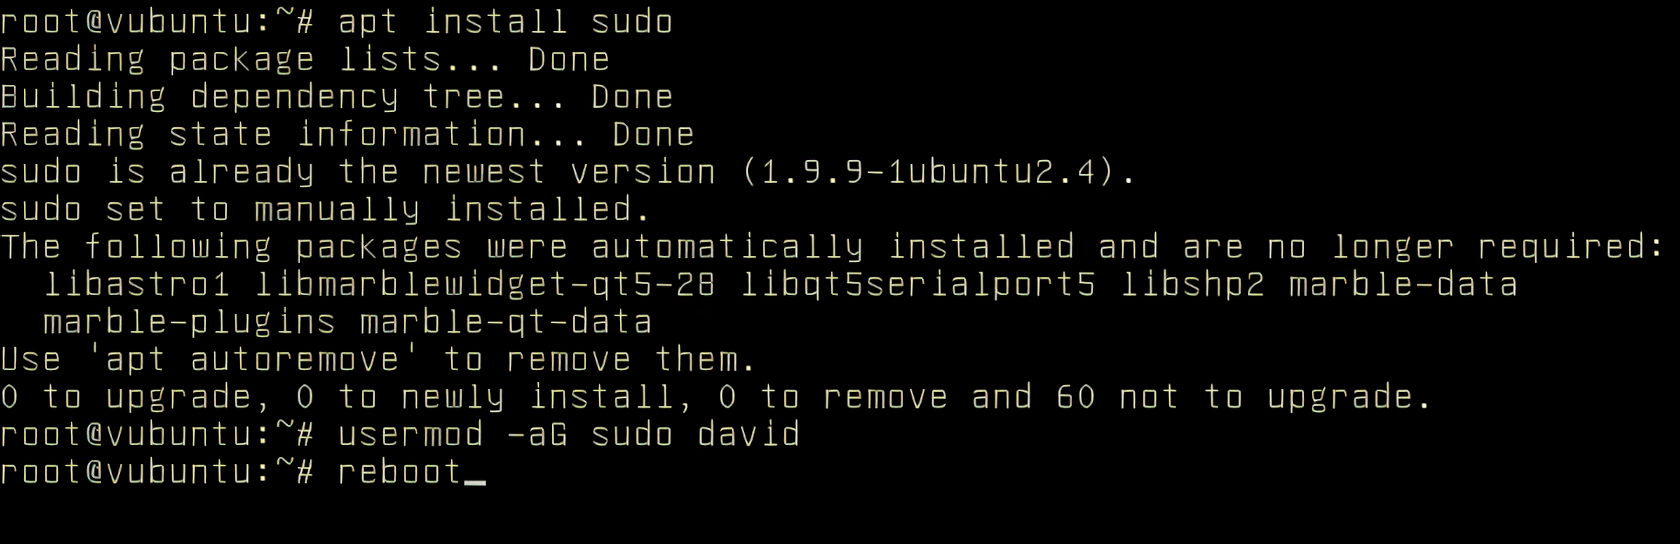 Installing sudo using the root shell